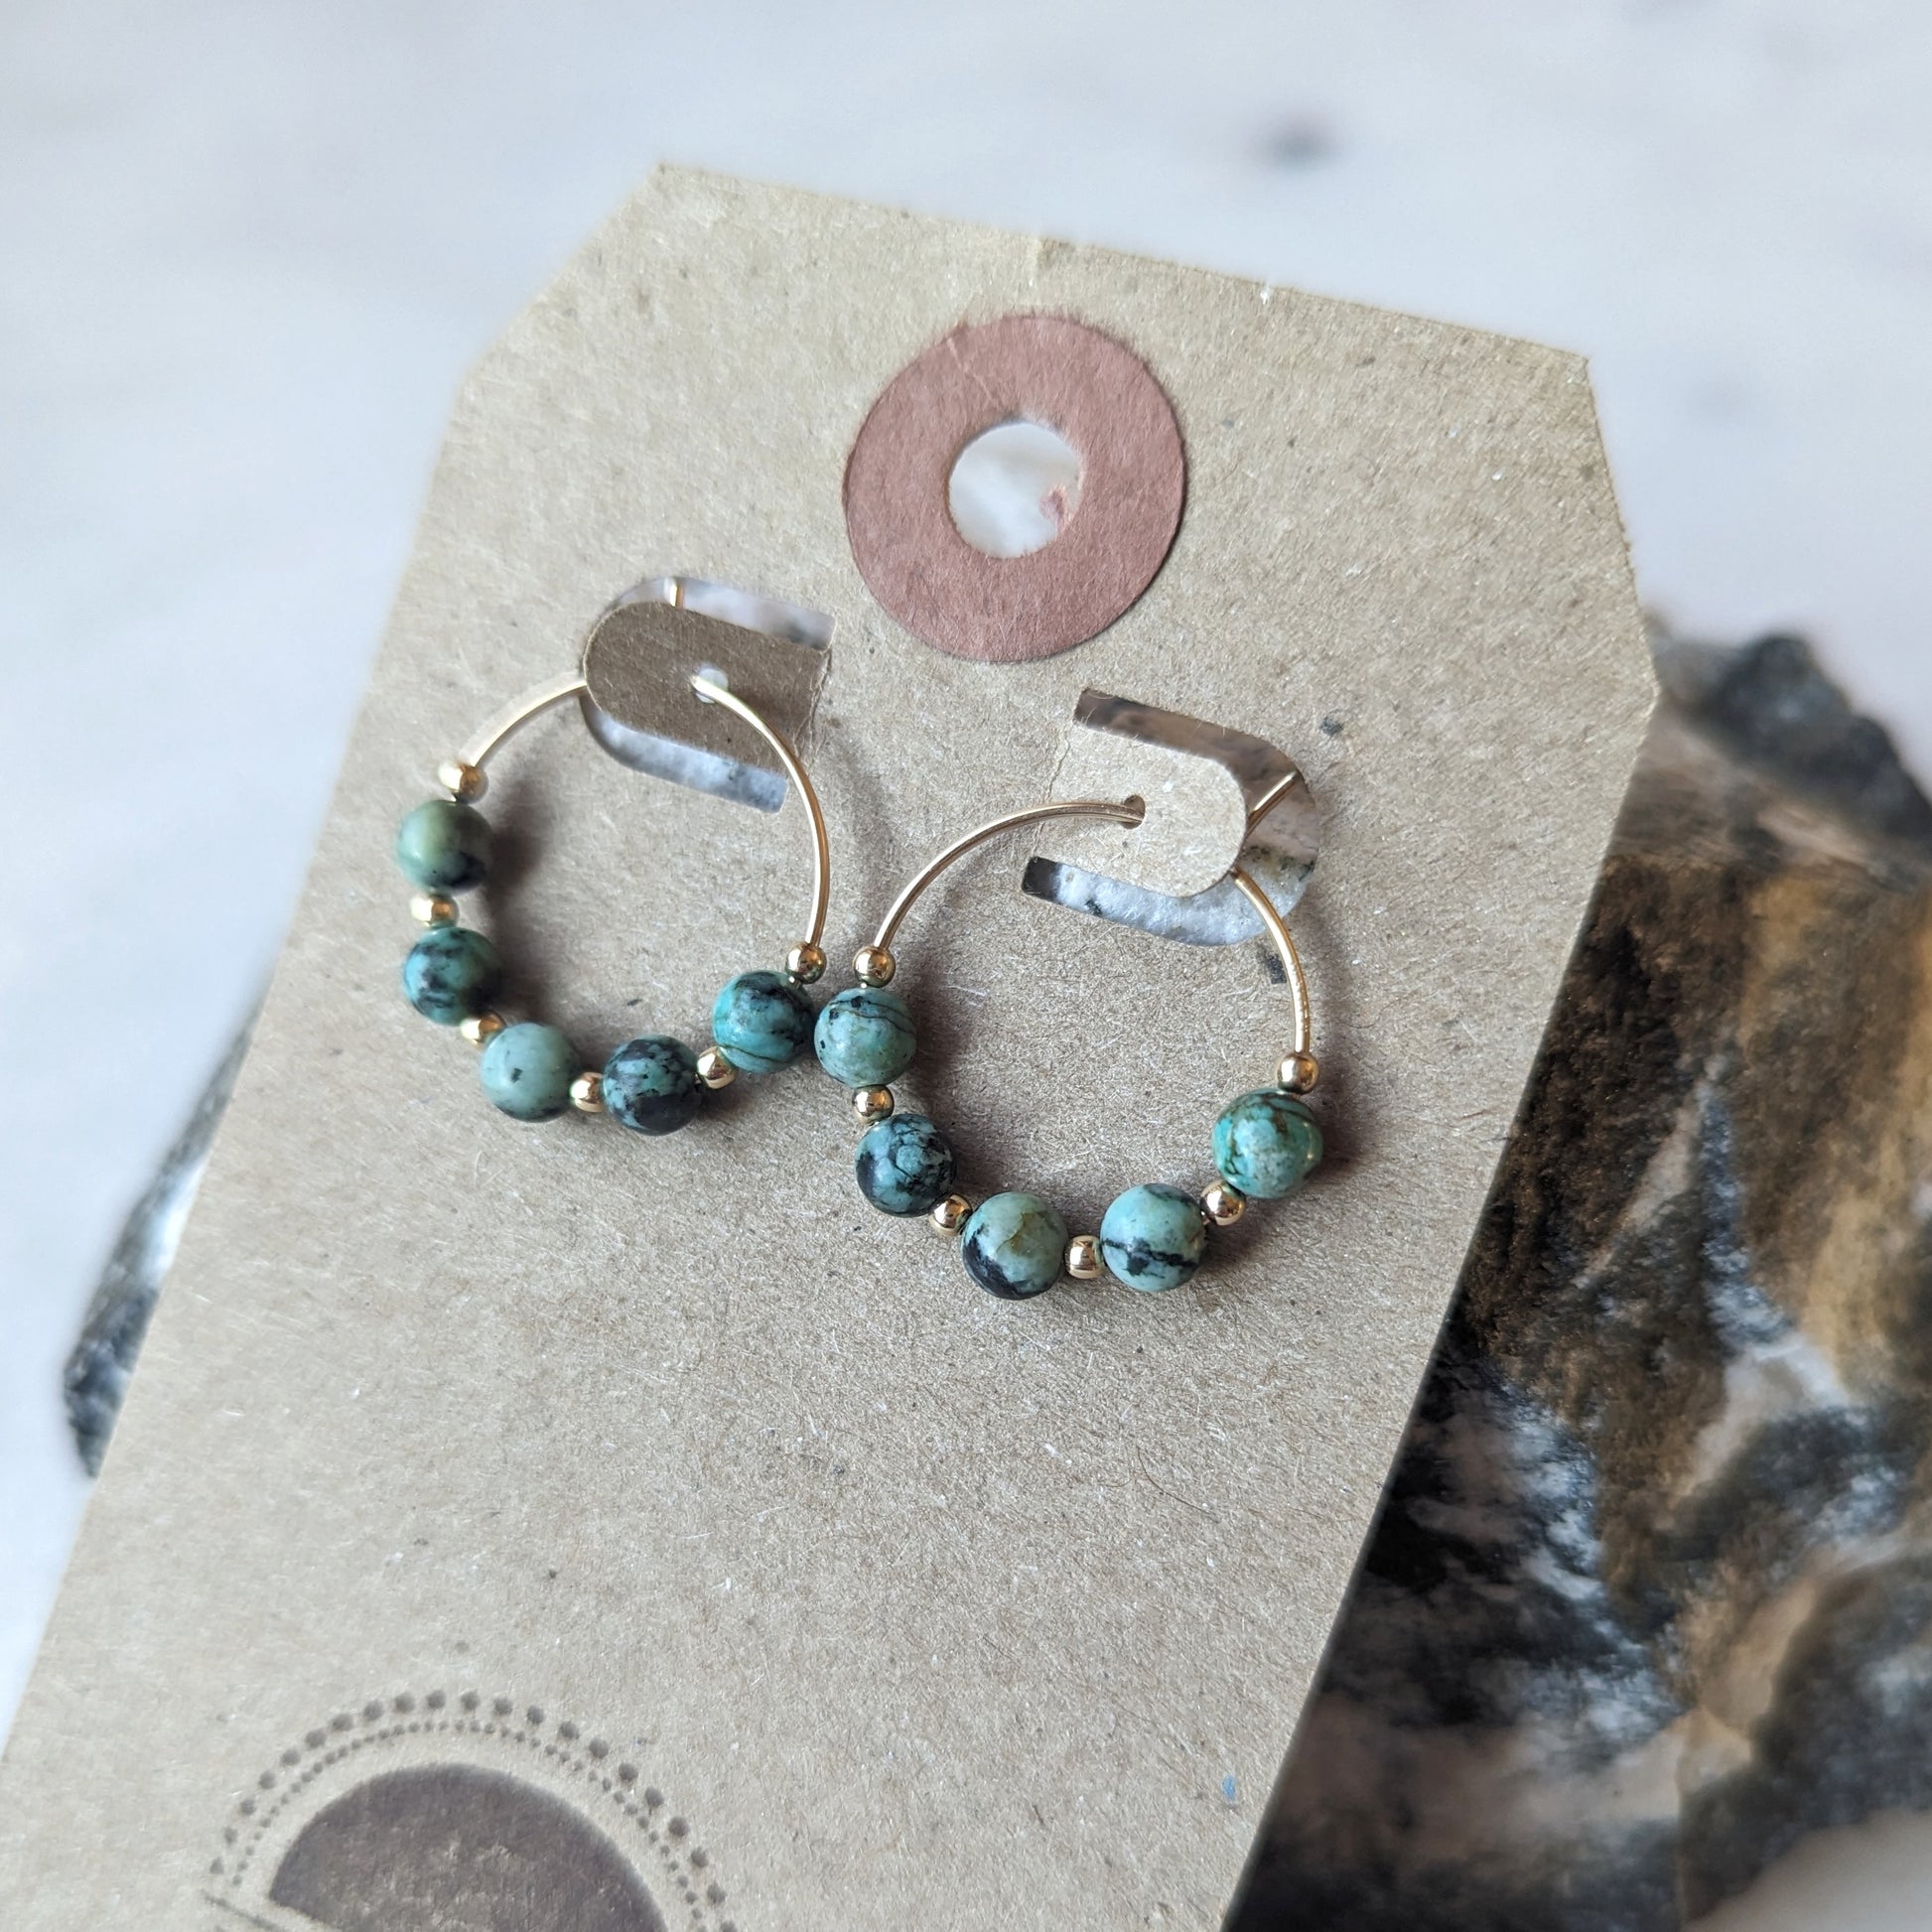 Gold Filled Mini African Turquoise Hoops